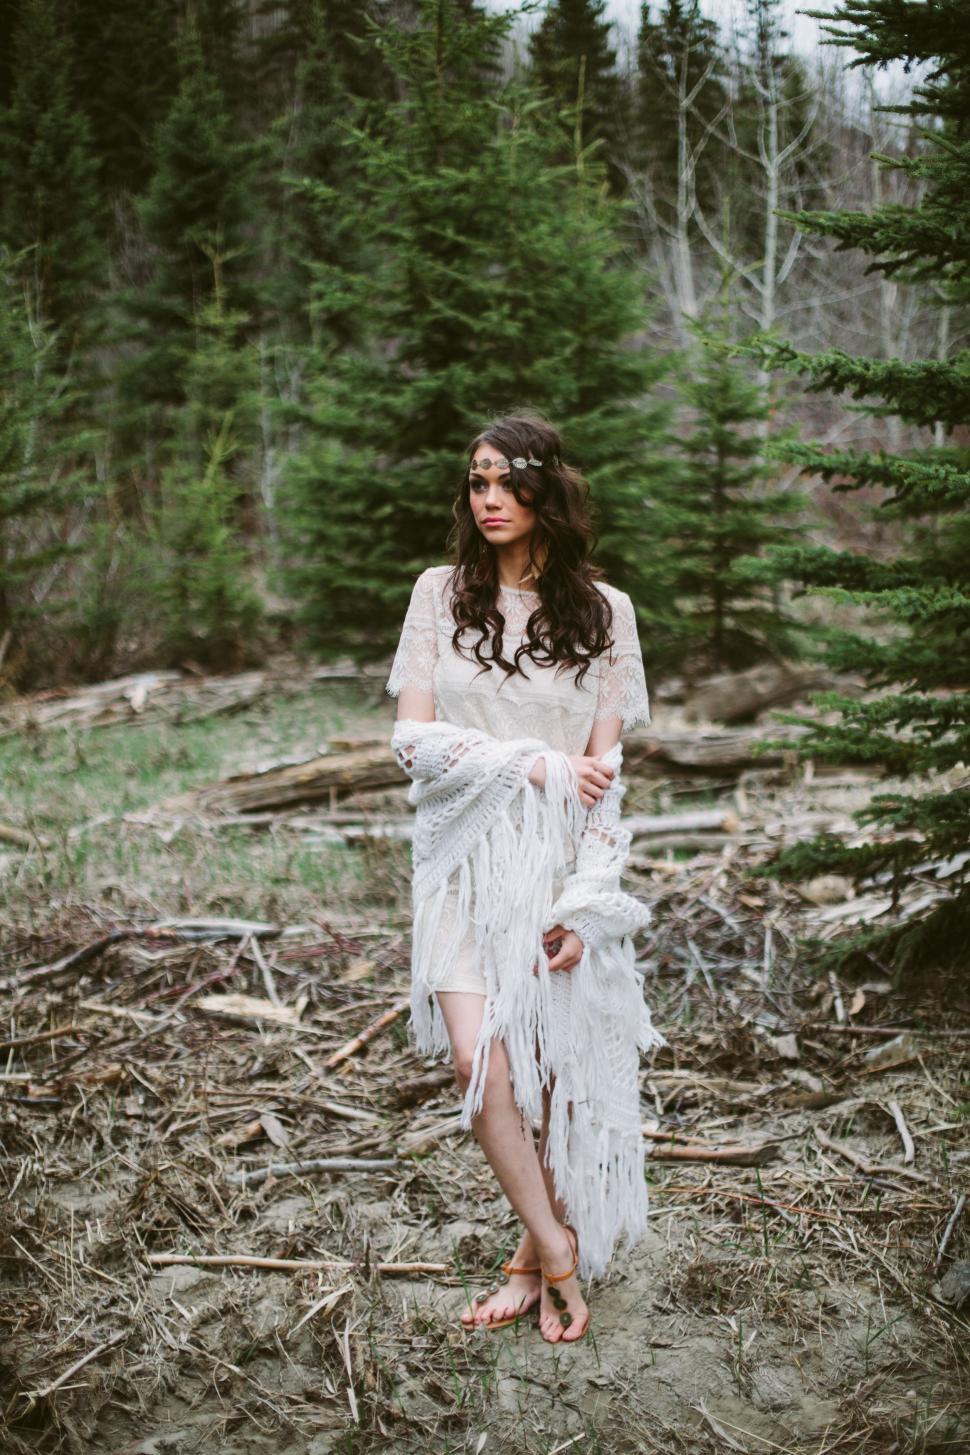 Free Image of Woman in White Dress Standing in Forest 